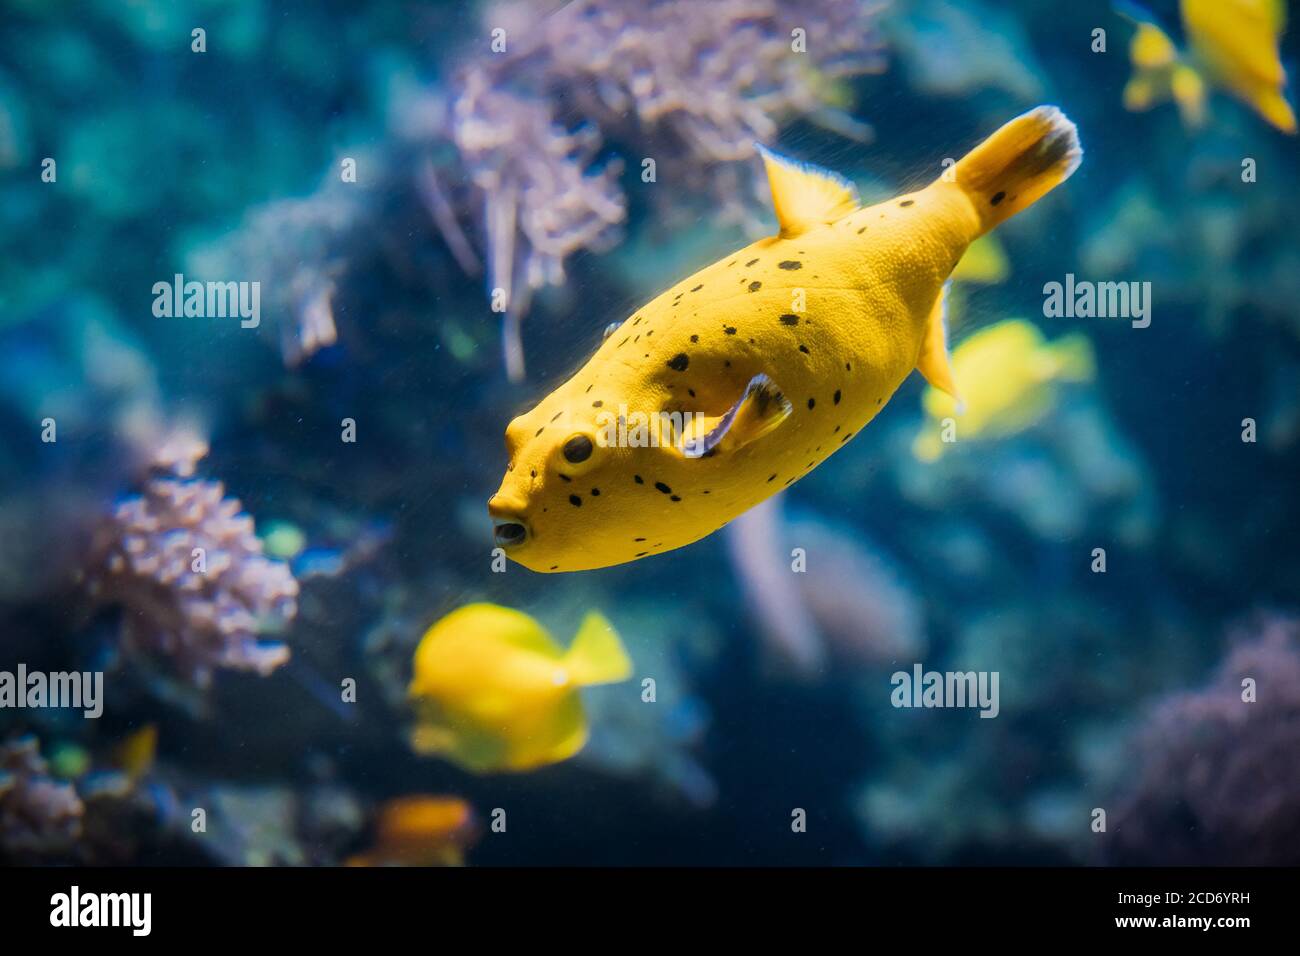 Yellow Blackspotted Puffer Or Dog-faced Puffer Fish Arothron Nigropunctatus Swimming In Water. If Not Prepared Properly, Toxin Found In Pufferfish - Stock Photo